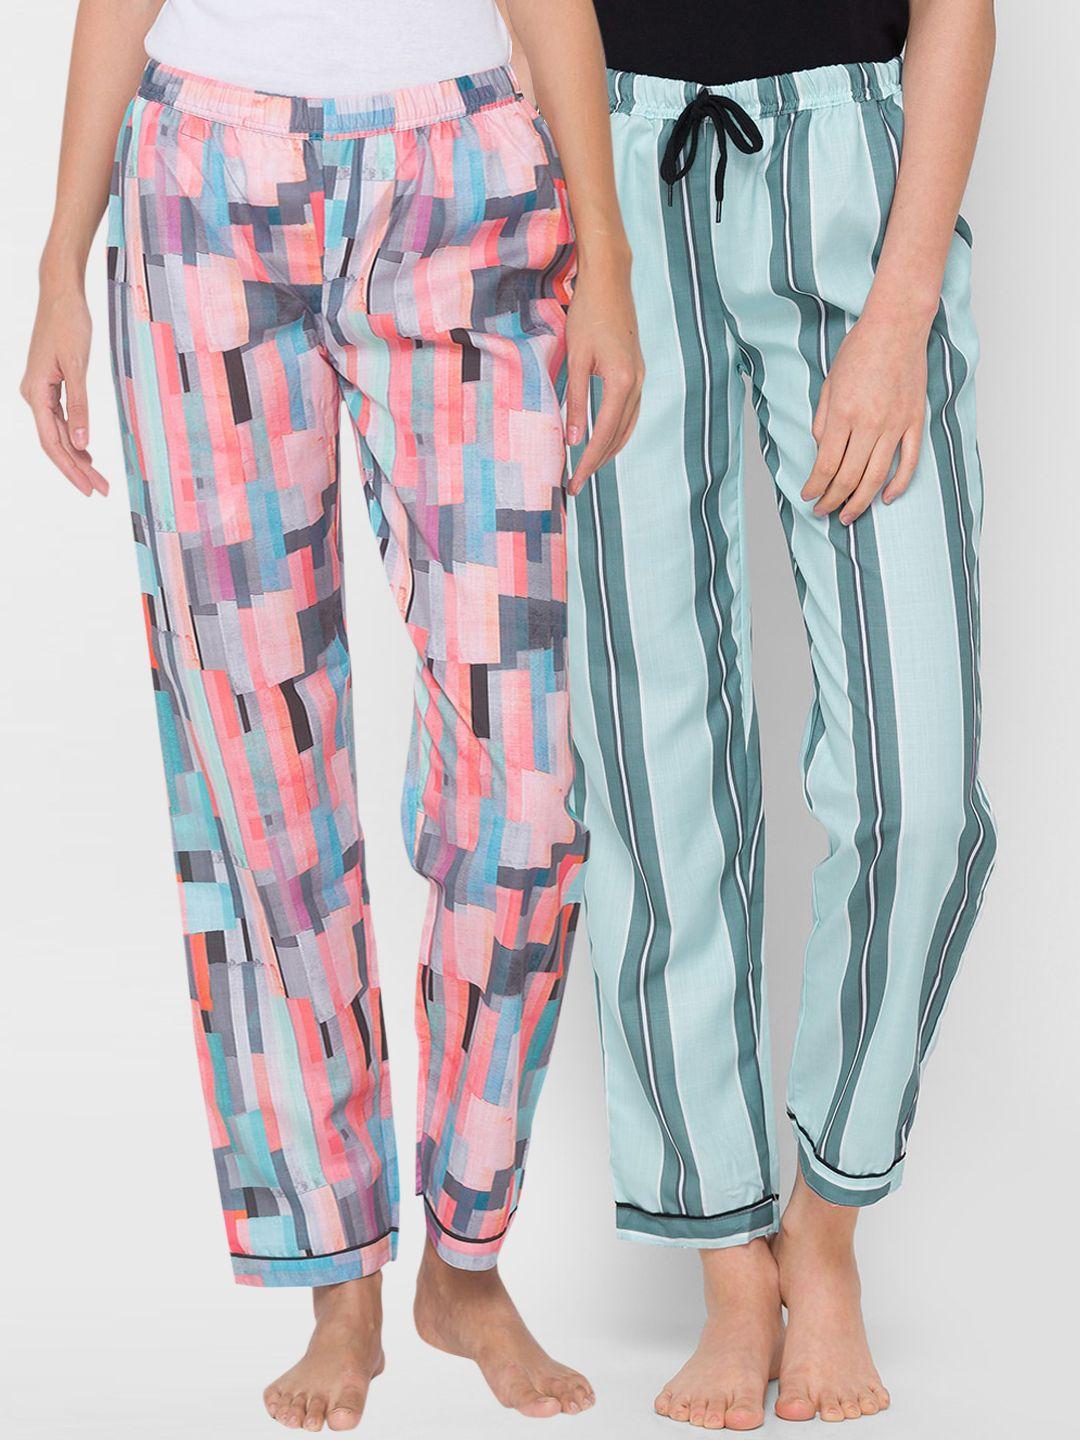 fashionrack women pack of 2 multicolored printed cotton lounge pants